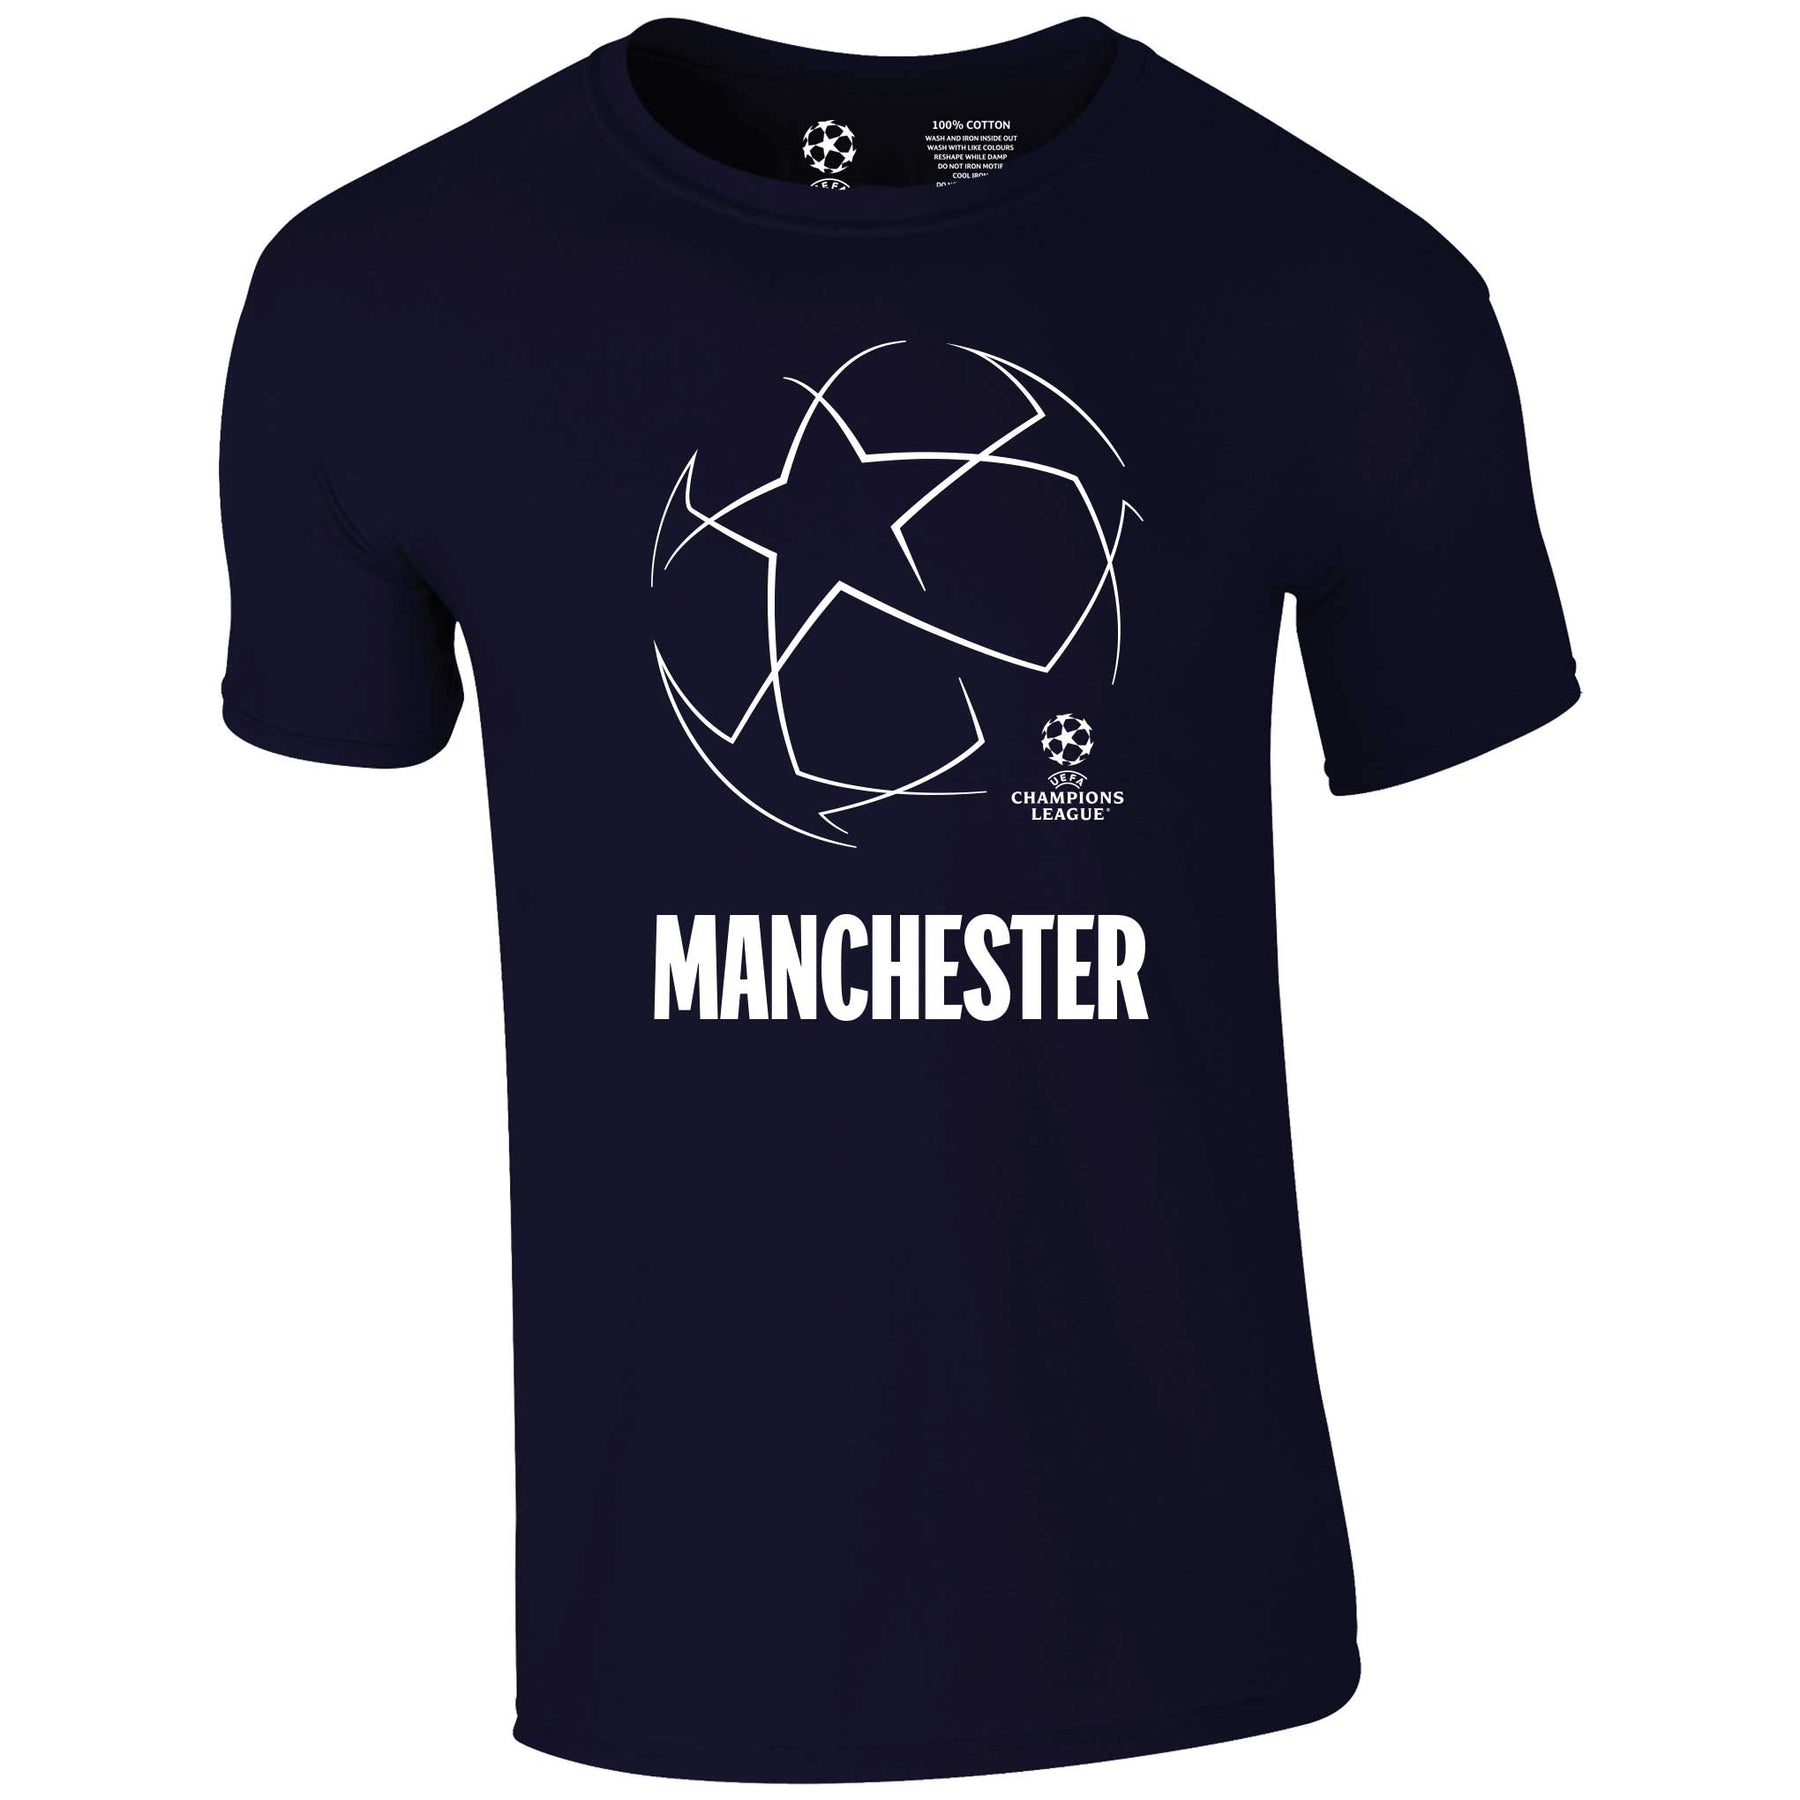 Champions League Starball Manchester City T-Shirt Navy